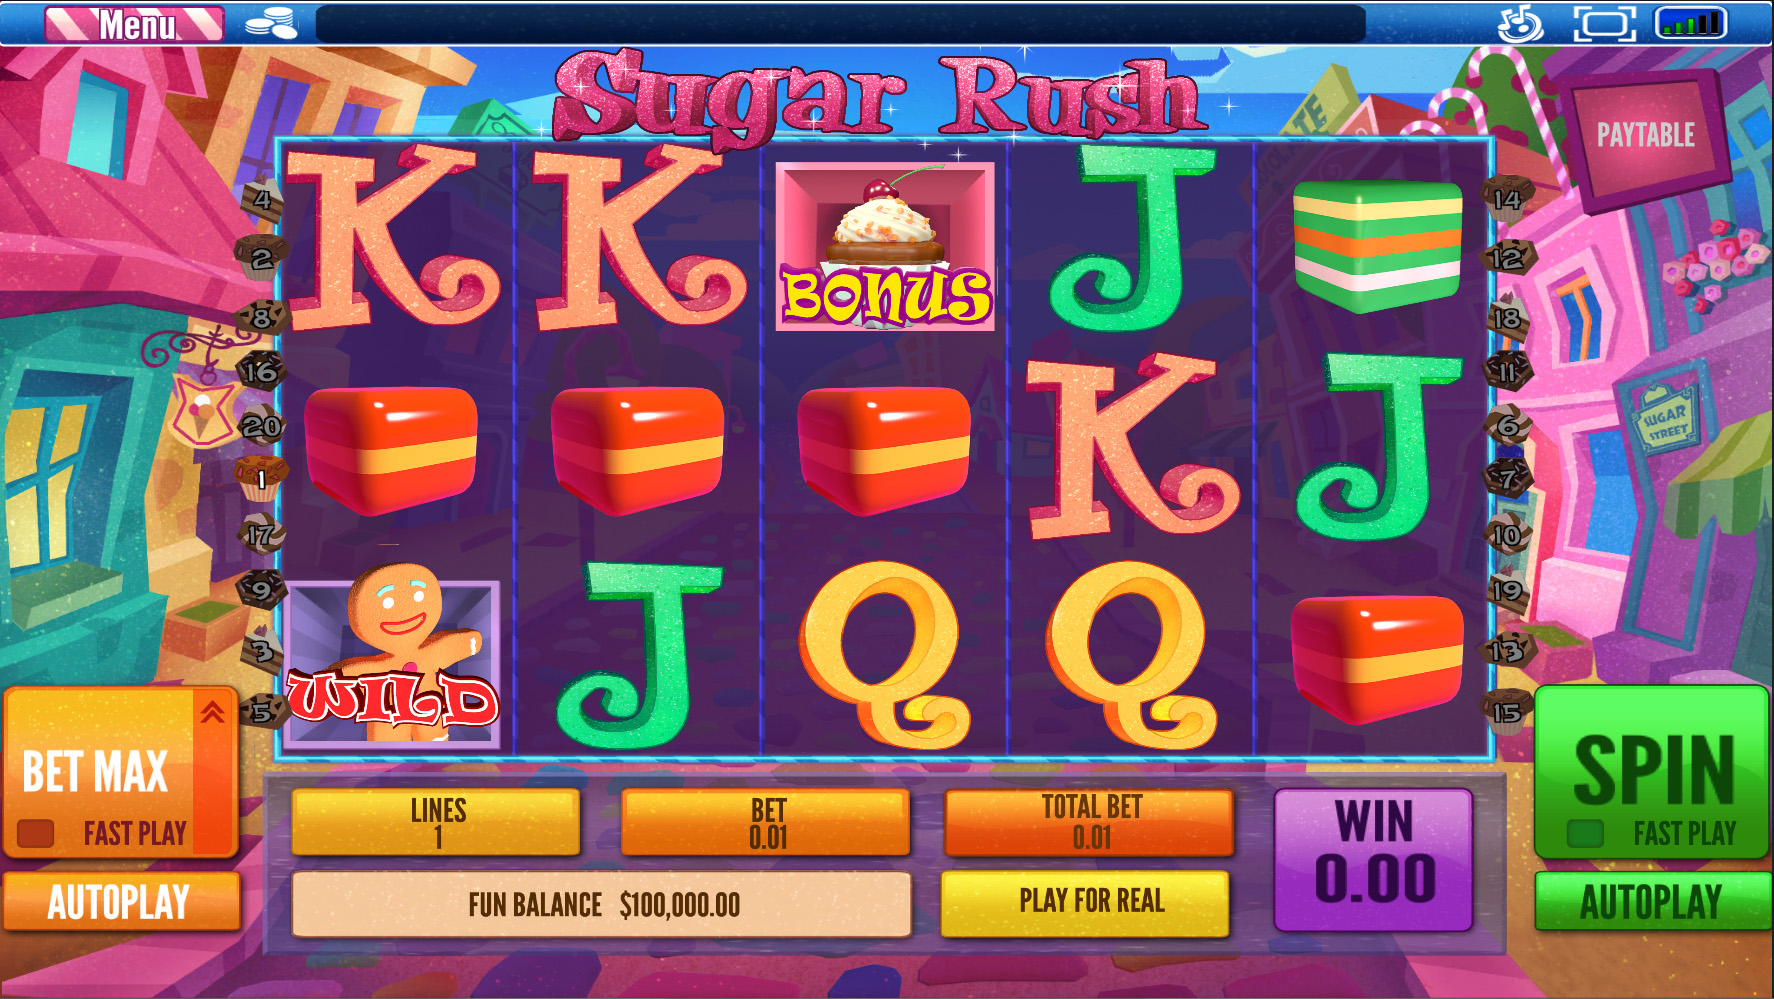 Jack and the beanstalk slot free spins